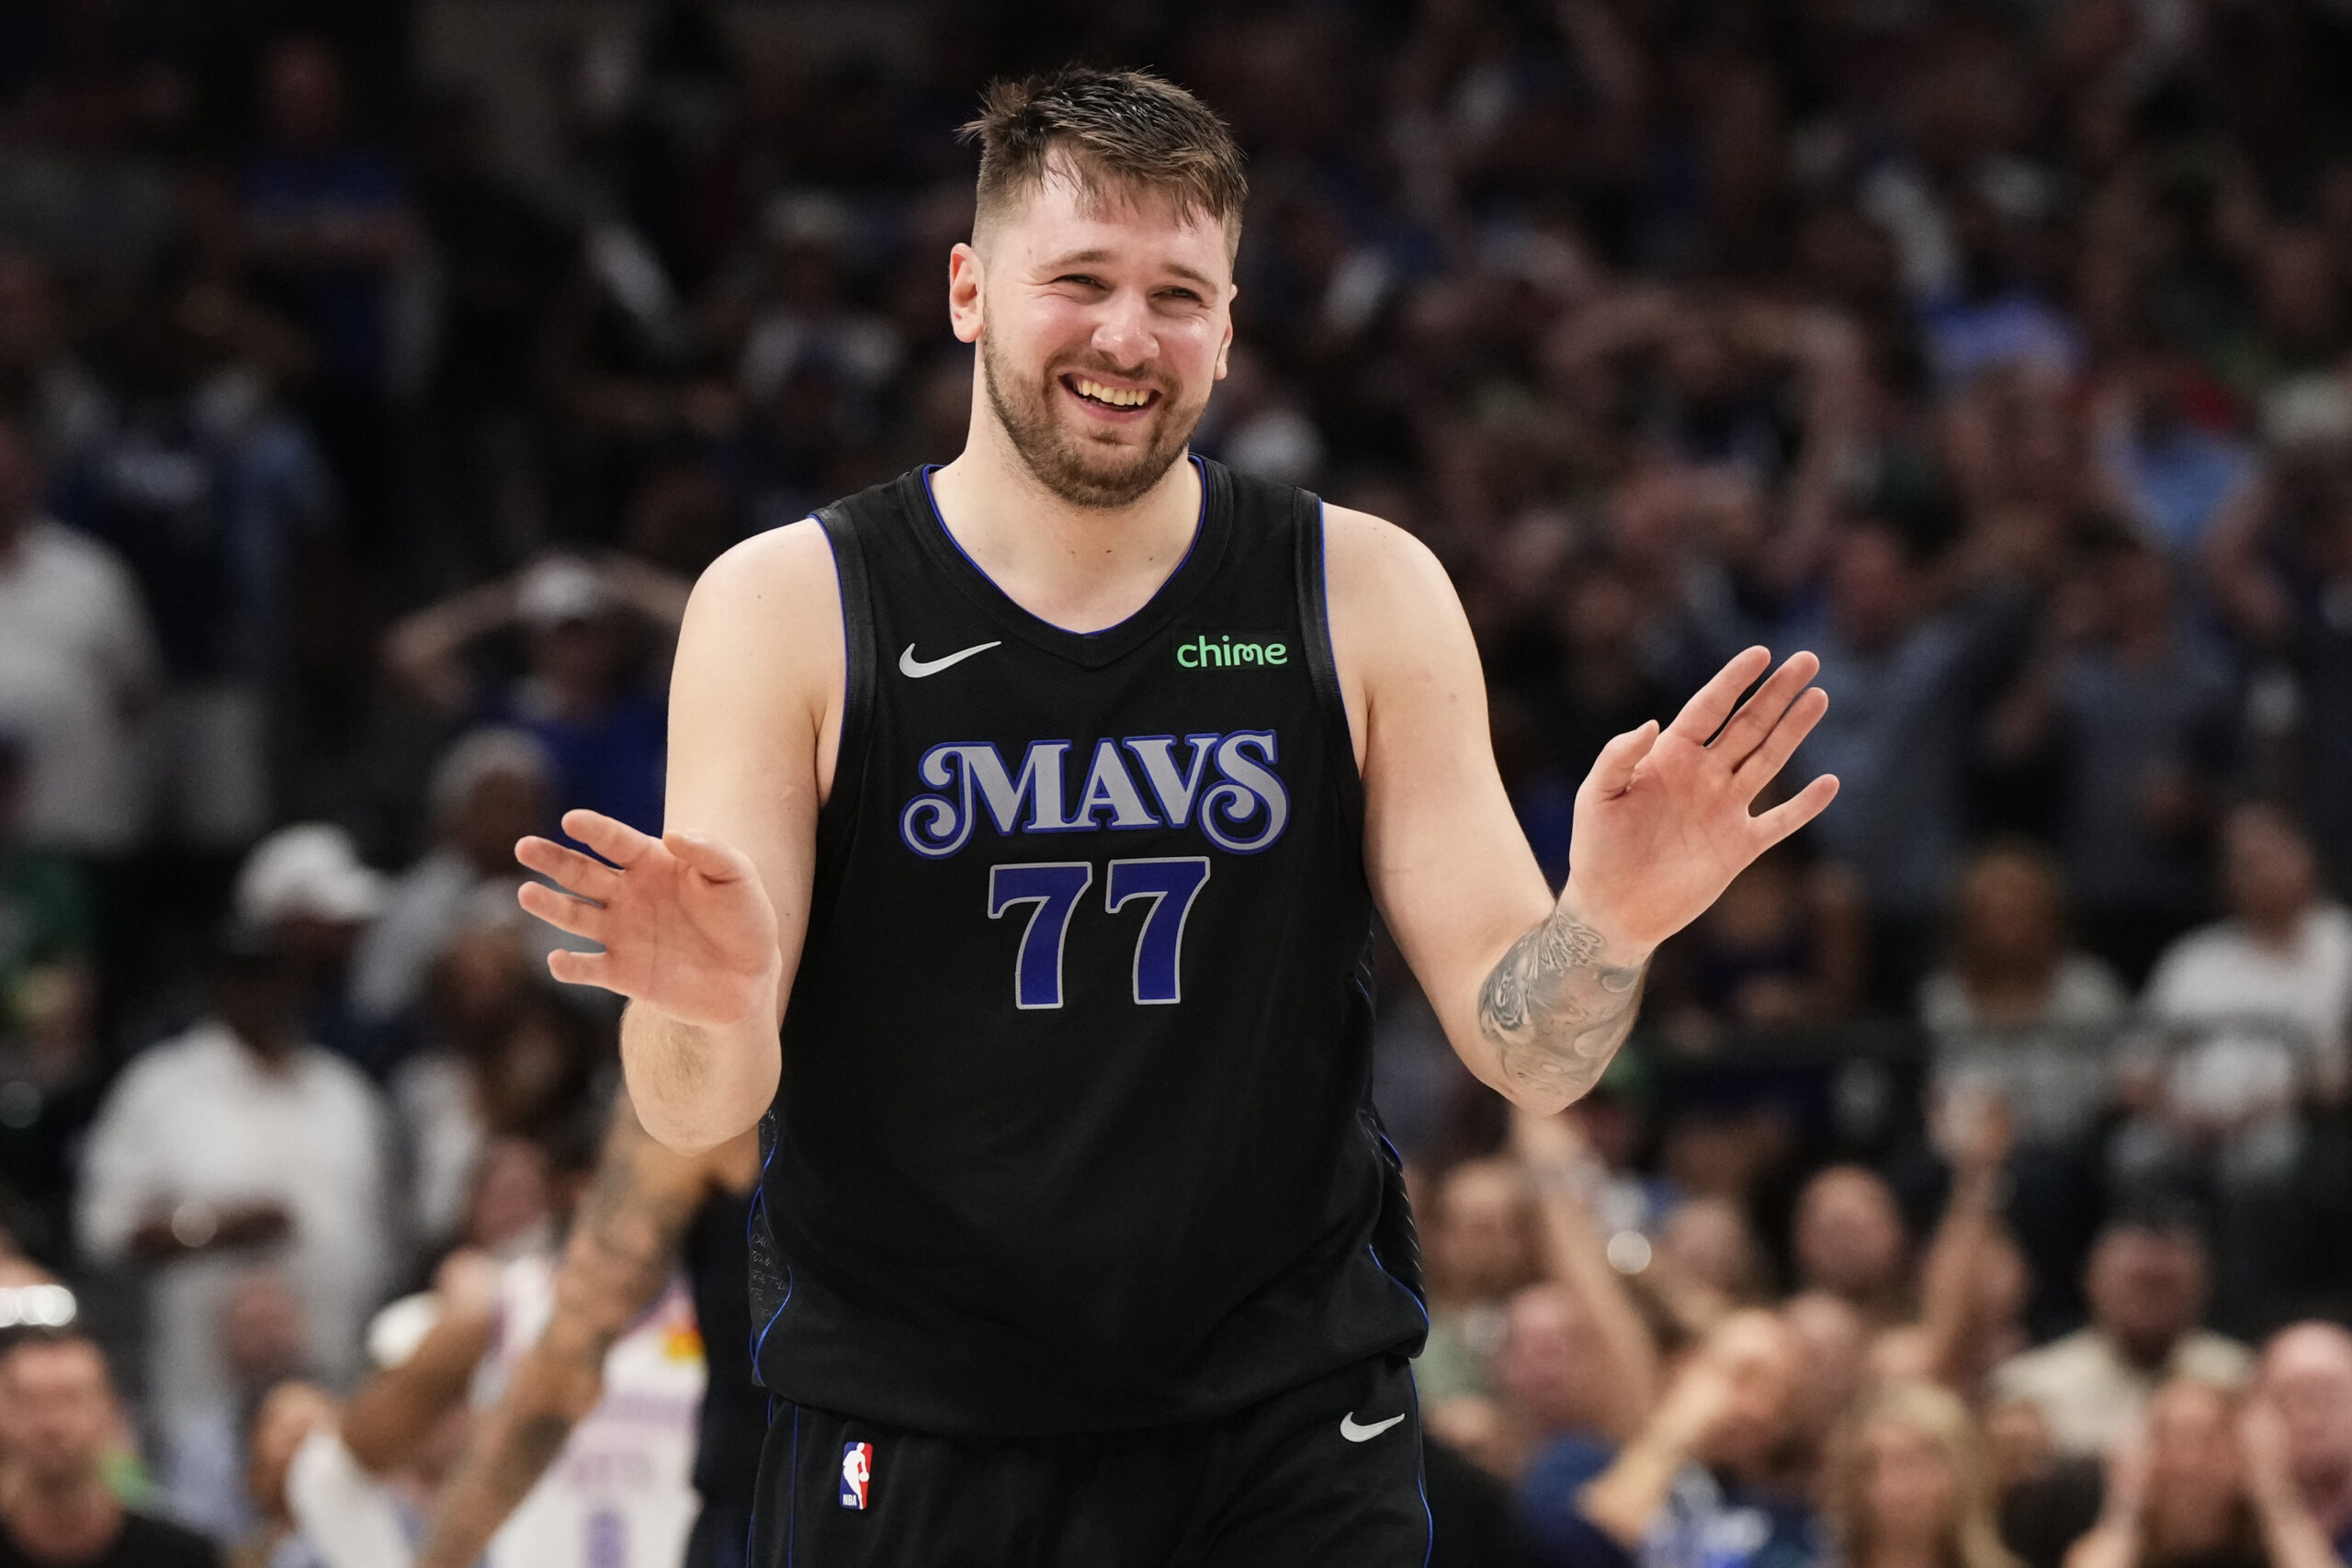 Luka Doncic made an outstanding contribution in Game 2